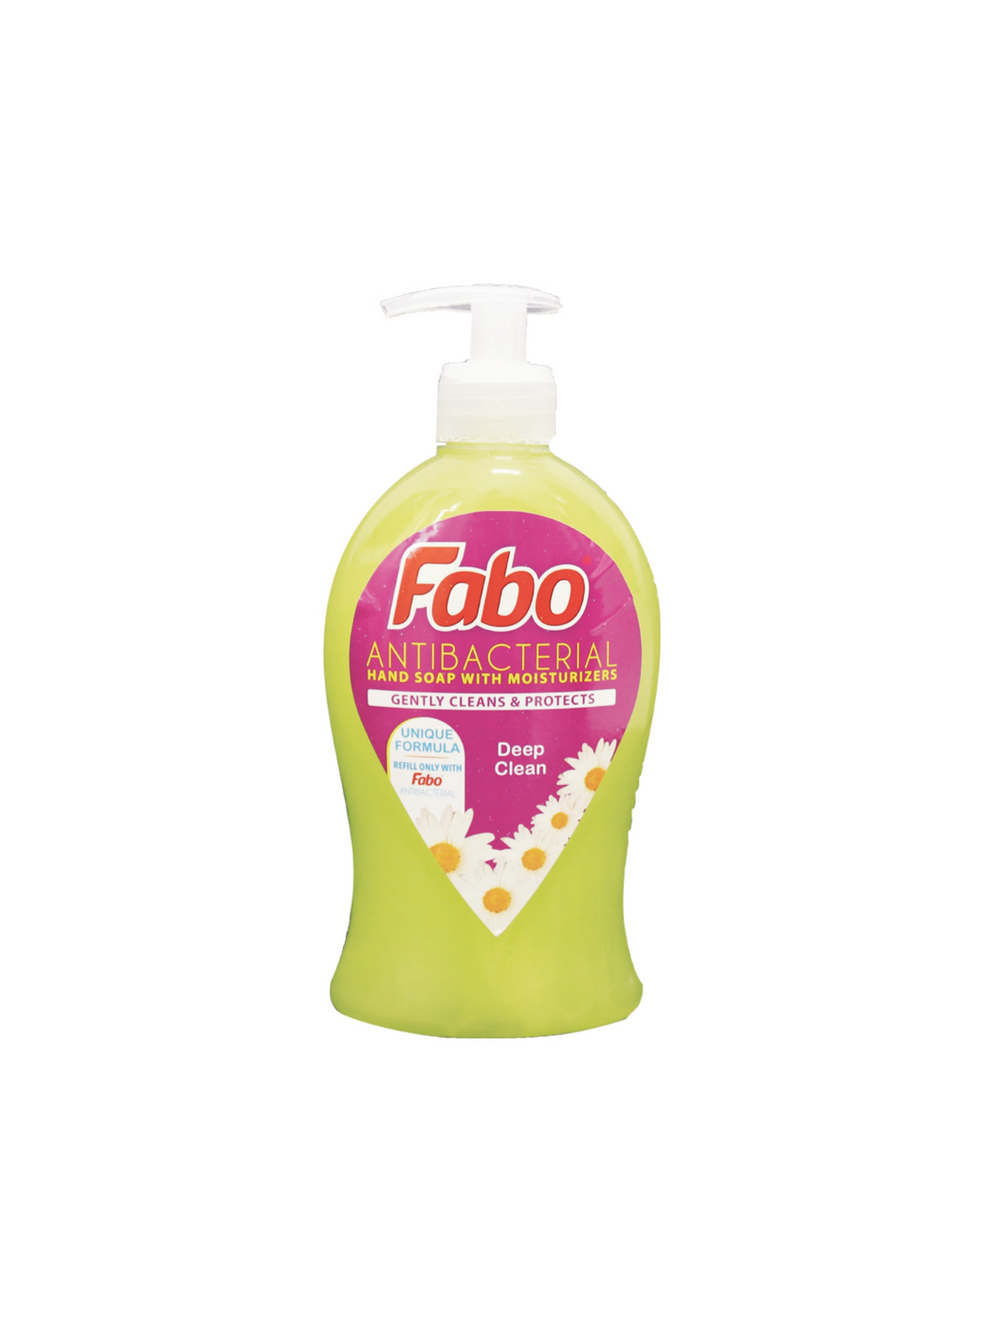 fabo-products_page-0091